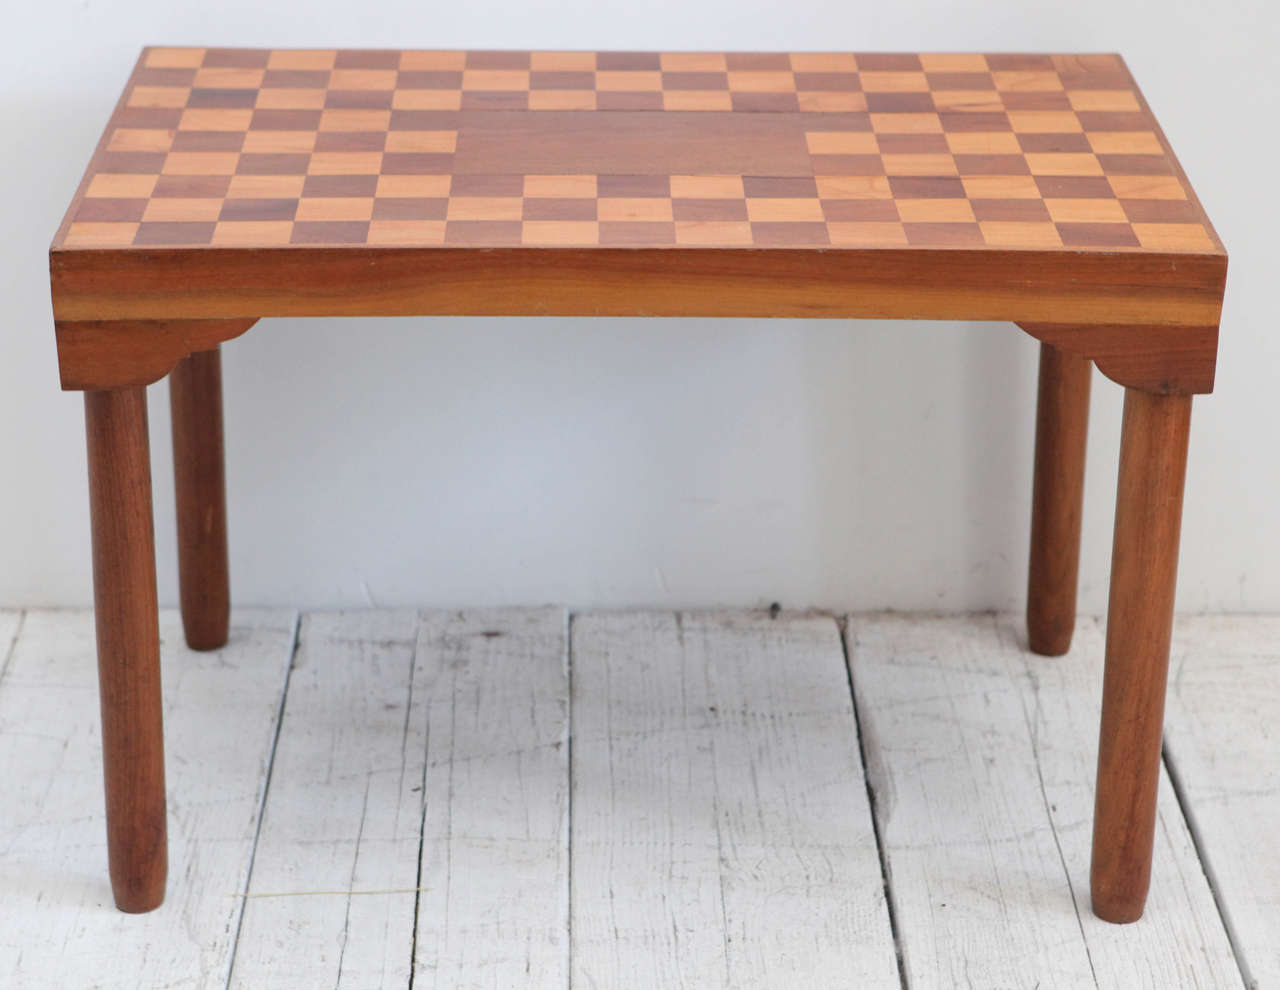 Handsome checkered top side table or end table.